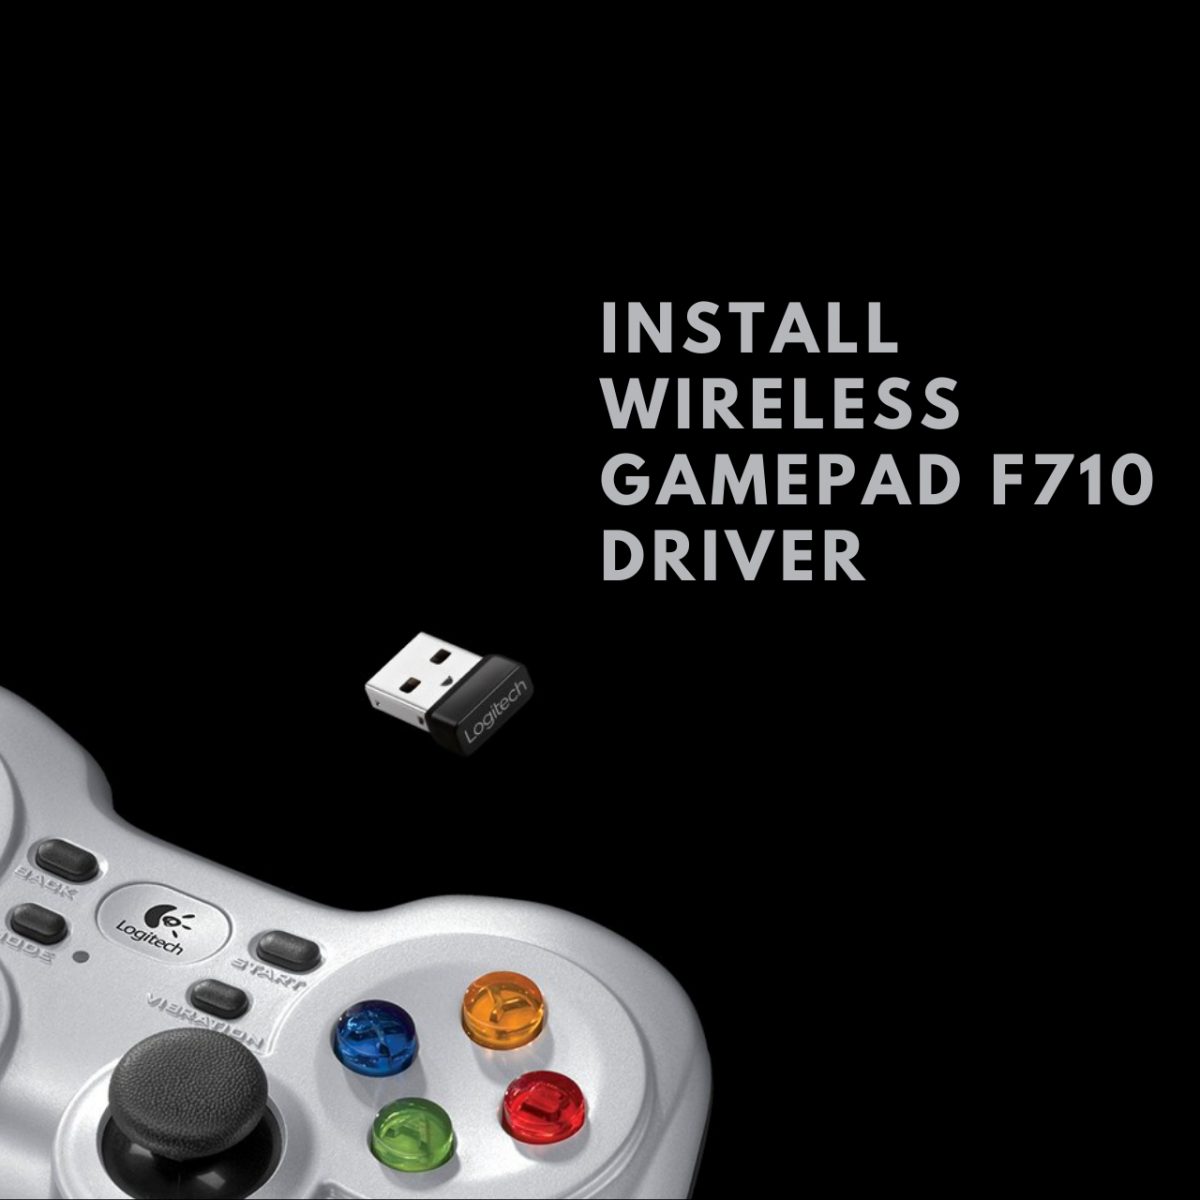 How easily install wireless gamepad driver